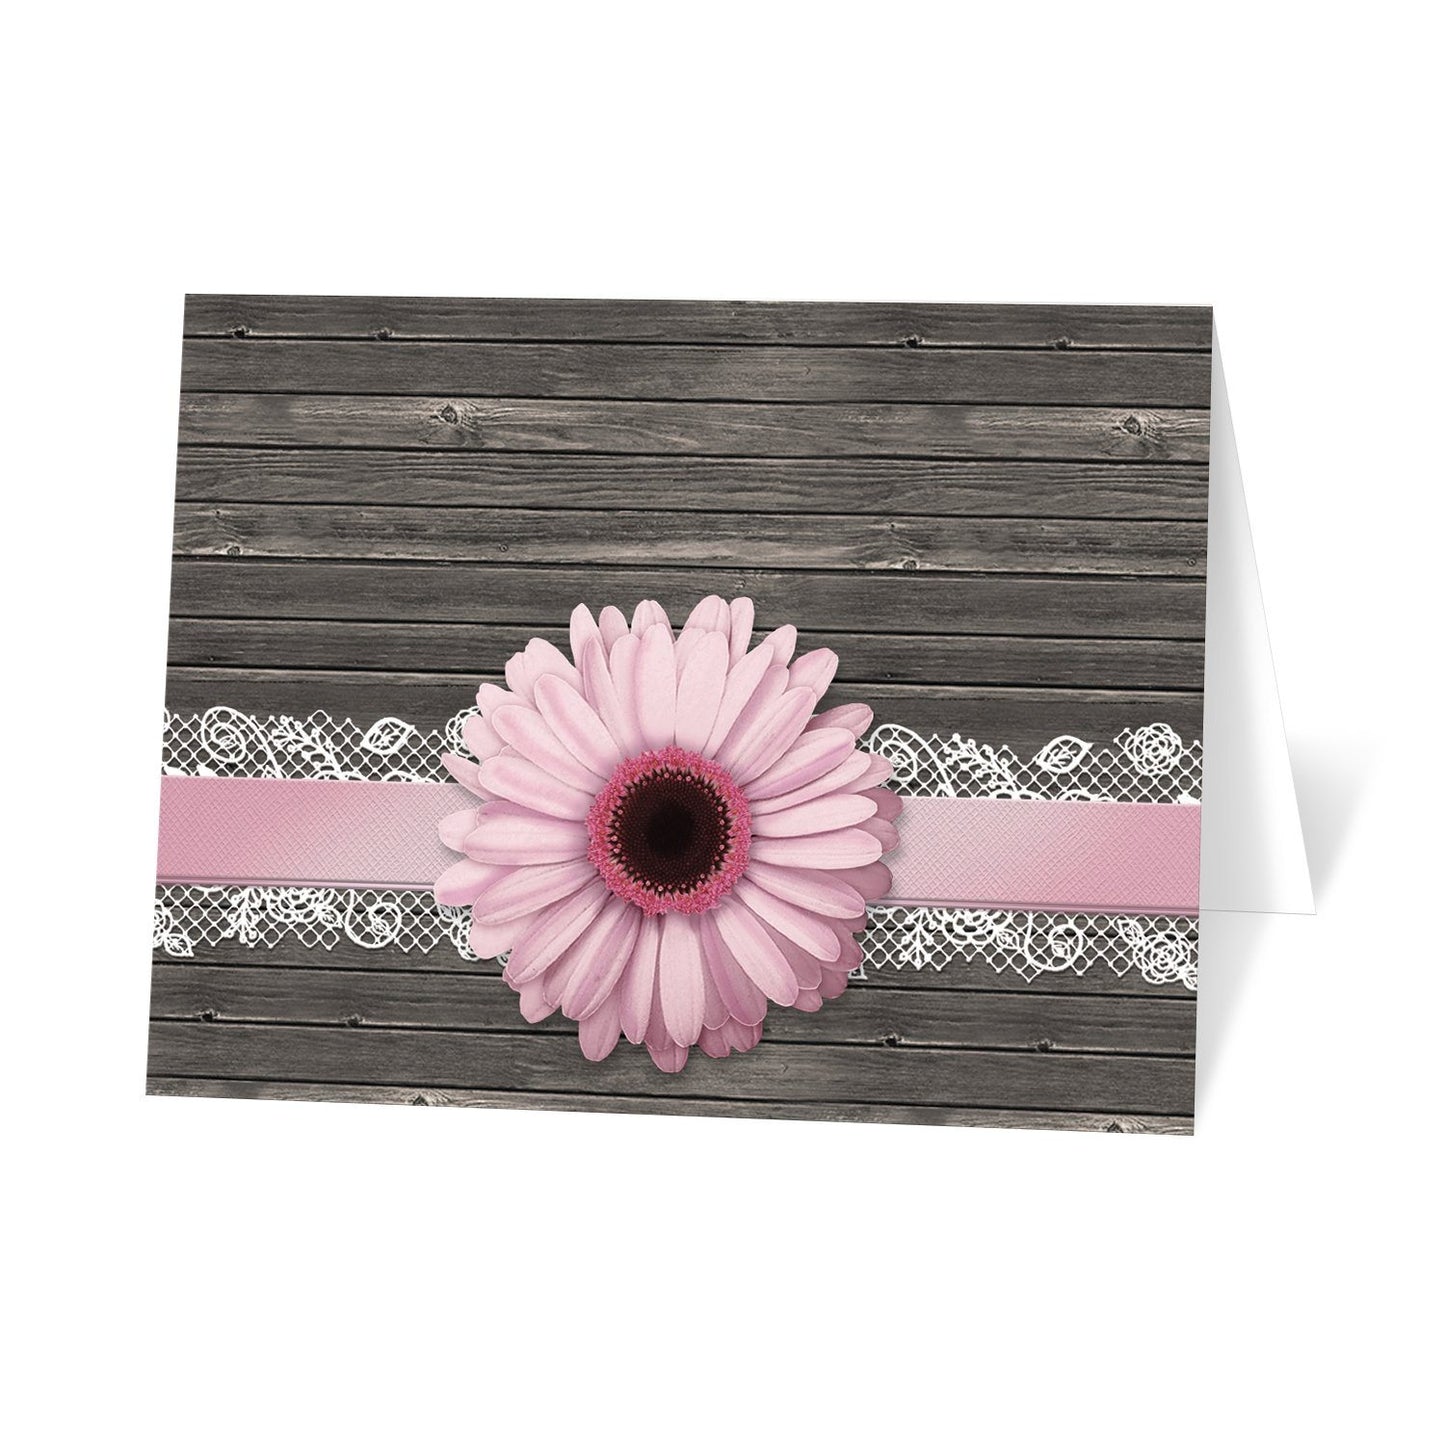 Pink Daisy Lace Rustic Wood Note Cards at Artistically Invited